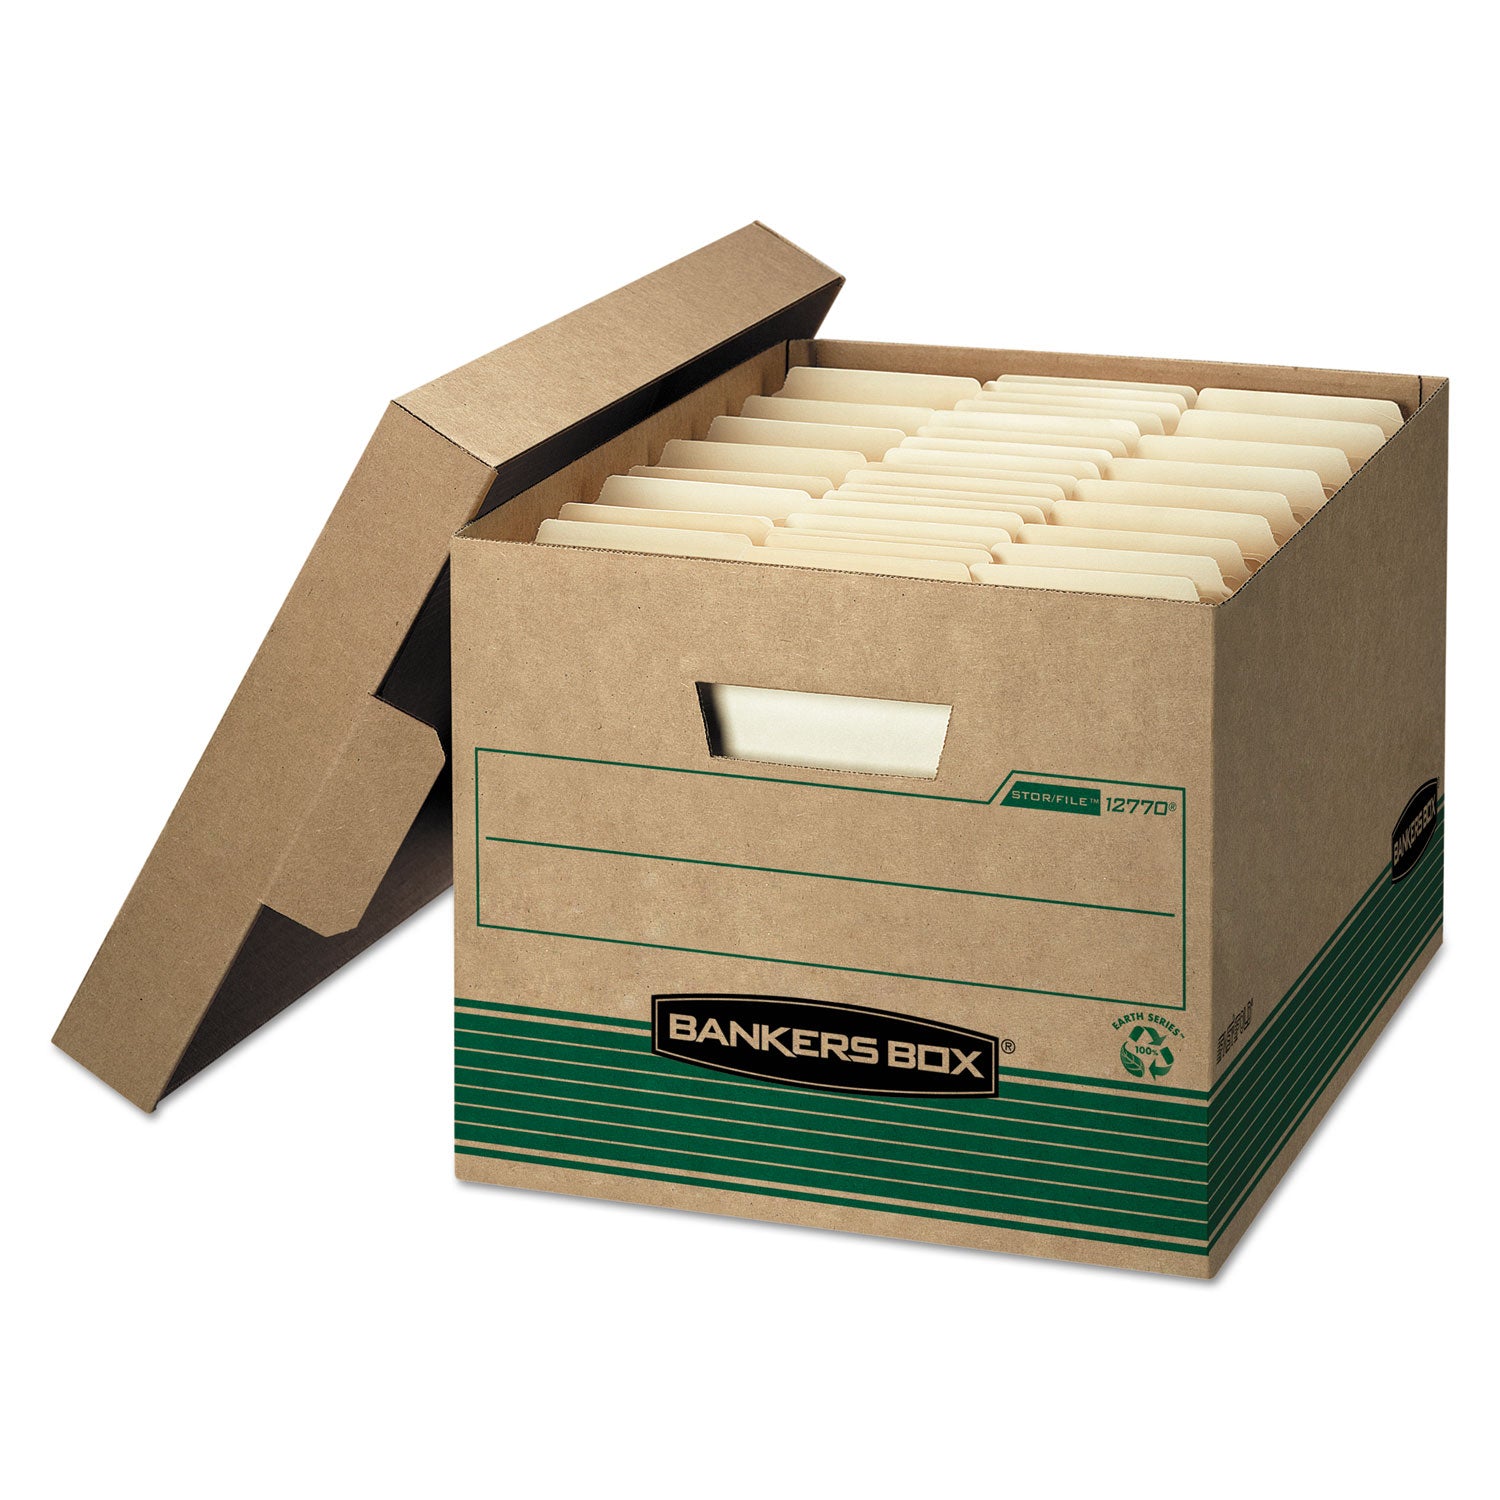 STOR/FILE Medium-Duty 100% Recycled Storage Boxes, Letter/Legal Files, 12.5" x 16.25" x 10.25", Kraft/Green, 12/Carton - 